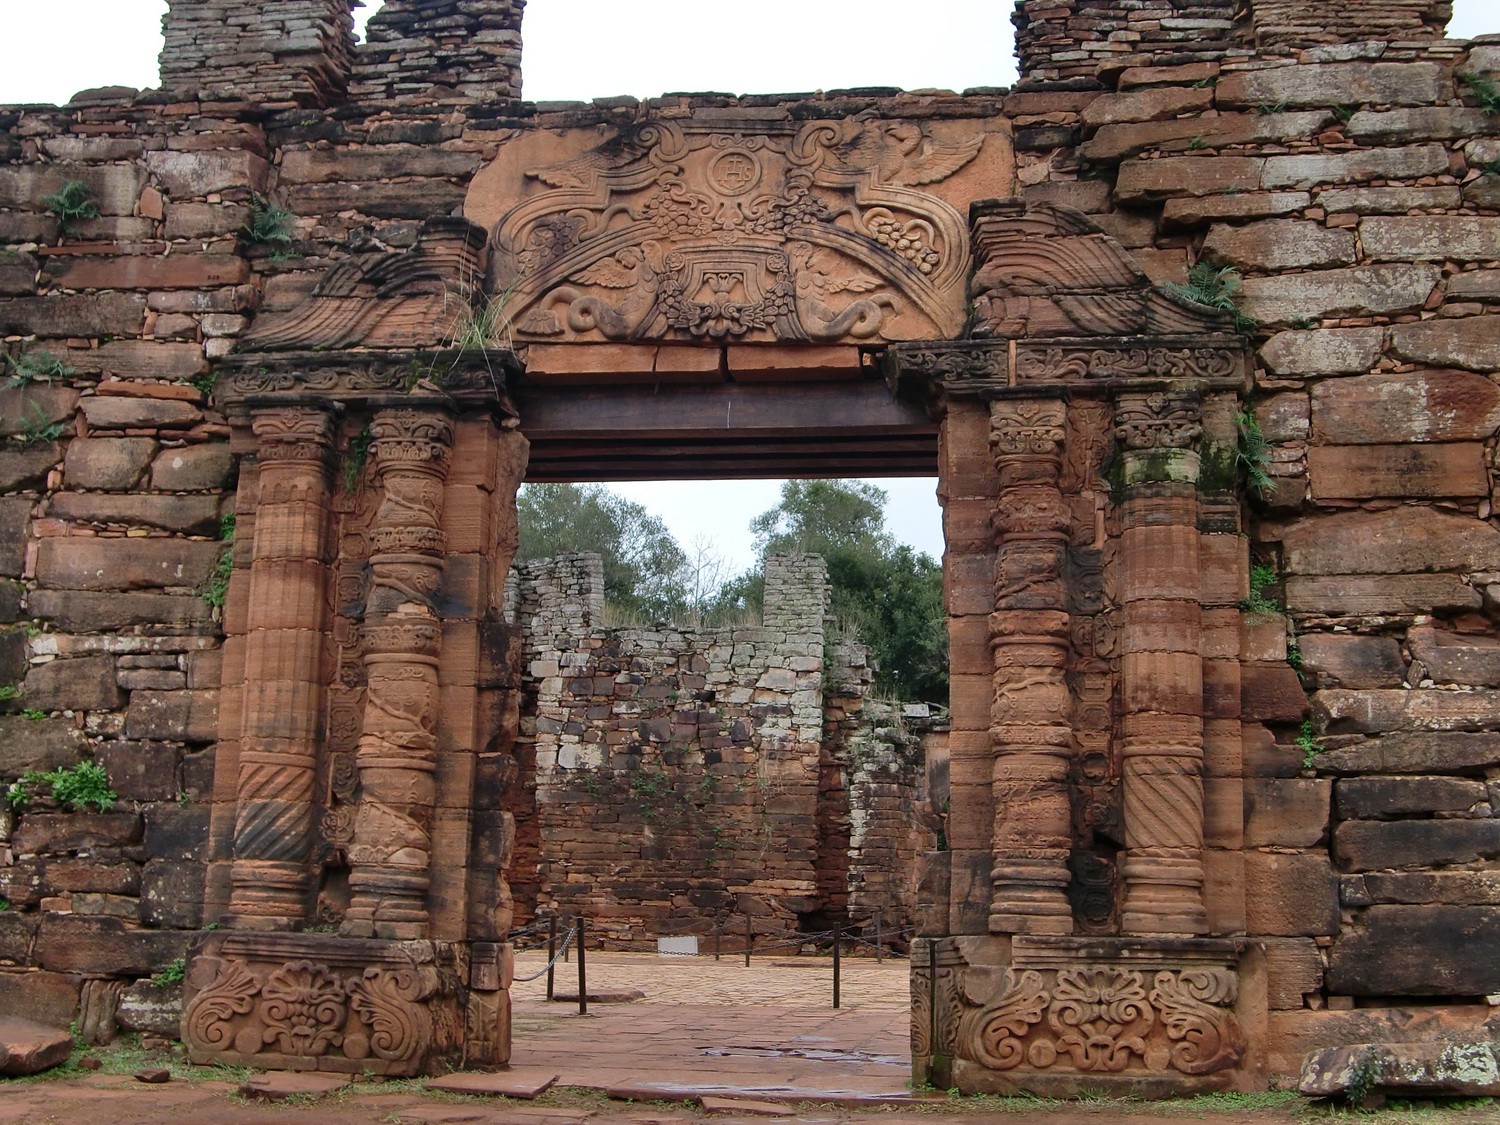 One of the side portals